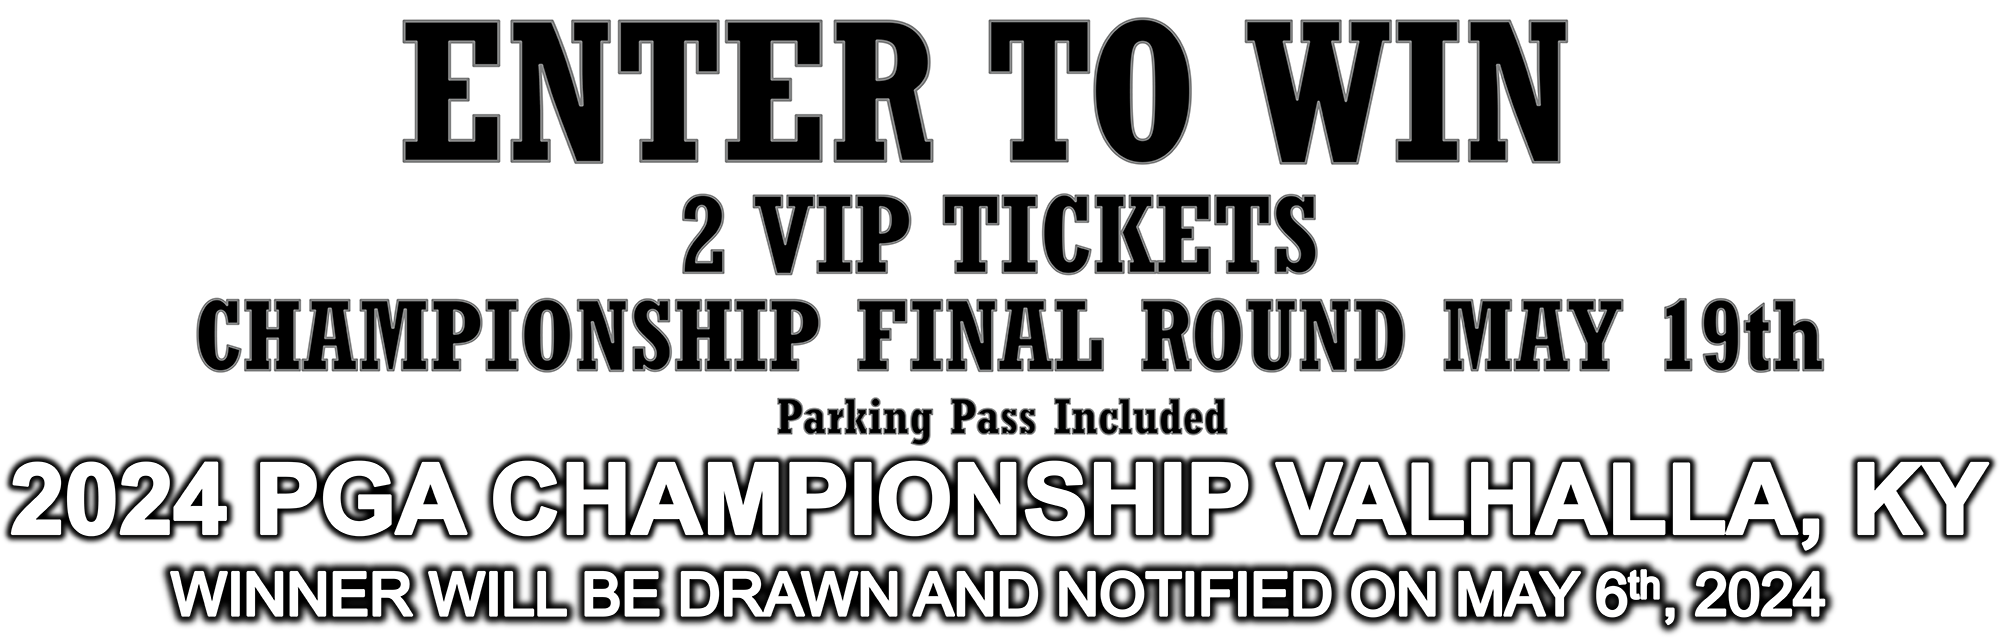 Enter to win 2 VIP tickets cha,pionship final round May 19th. Parking pass included. 2024 PGA Championship Valhalla. Winner will be drawn and notified on May 6th, 2024.